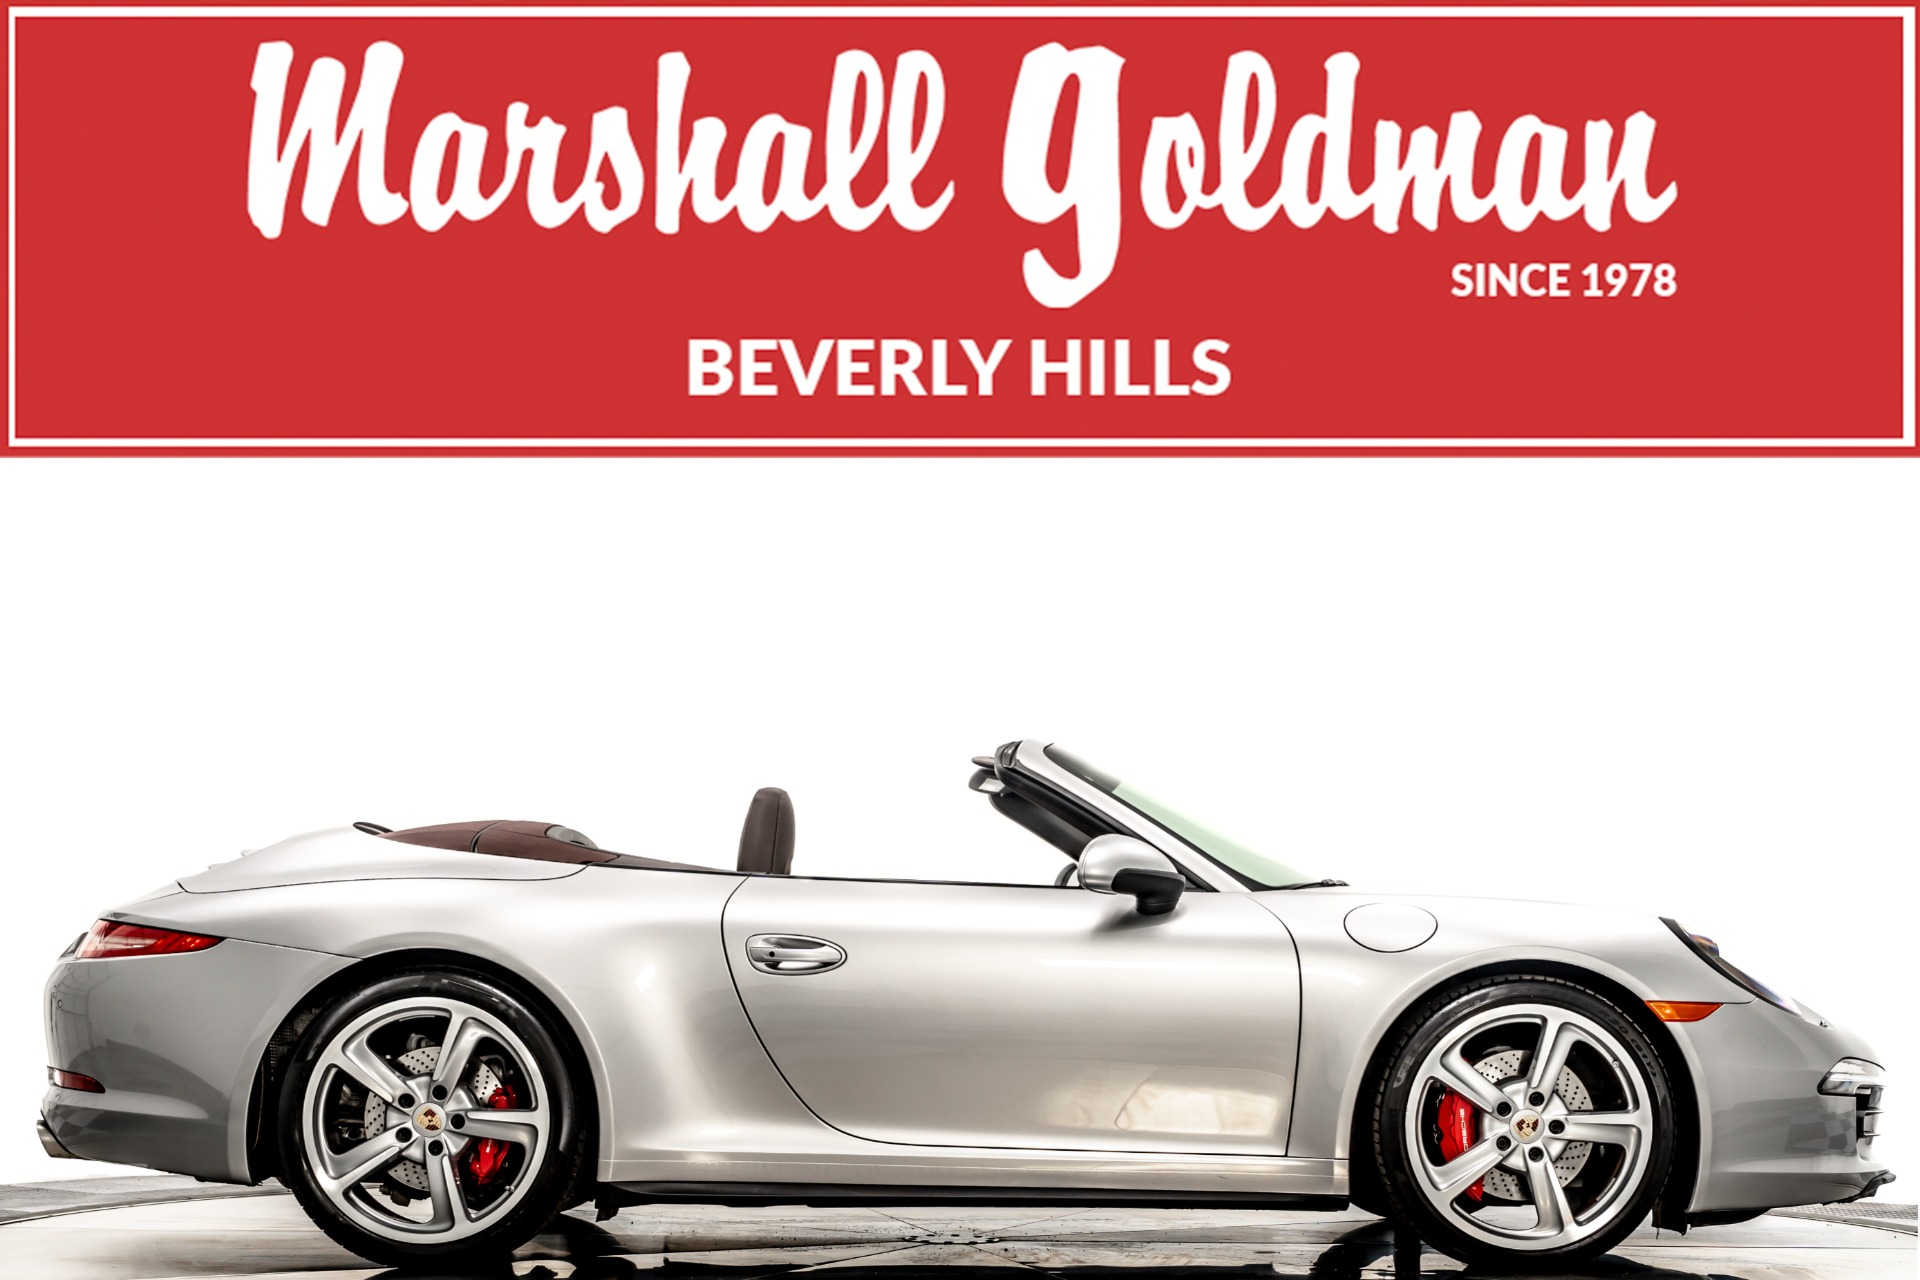 Used 2015 Porsche 911 Carrera 4S Cabriolet For Sale (Sold) | Marshall  Goldman Cleveland Stock #B22411